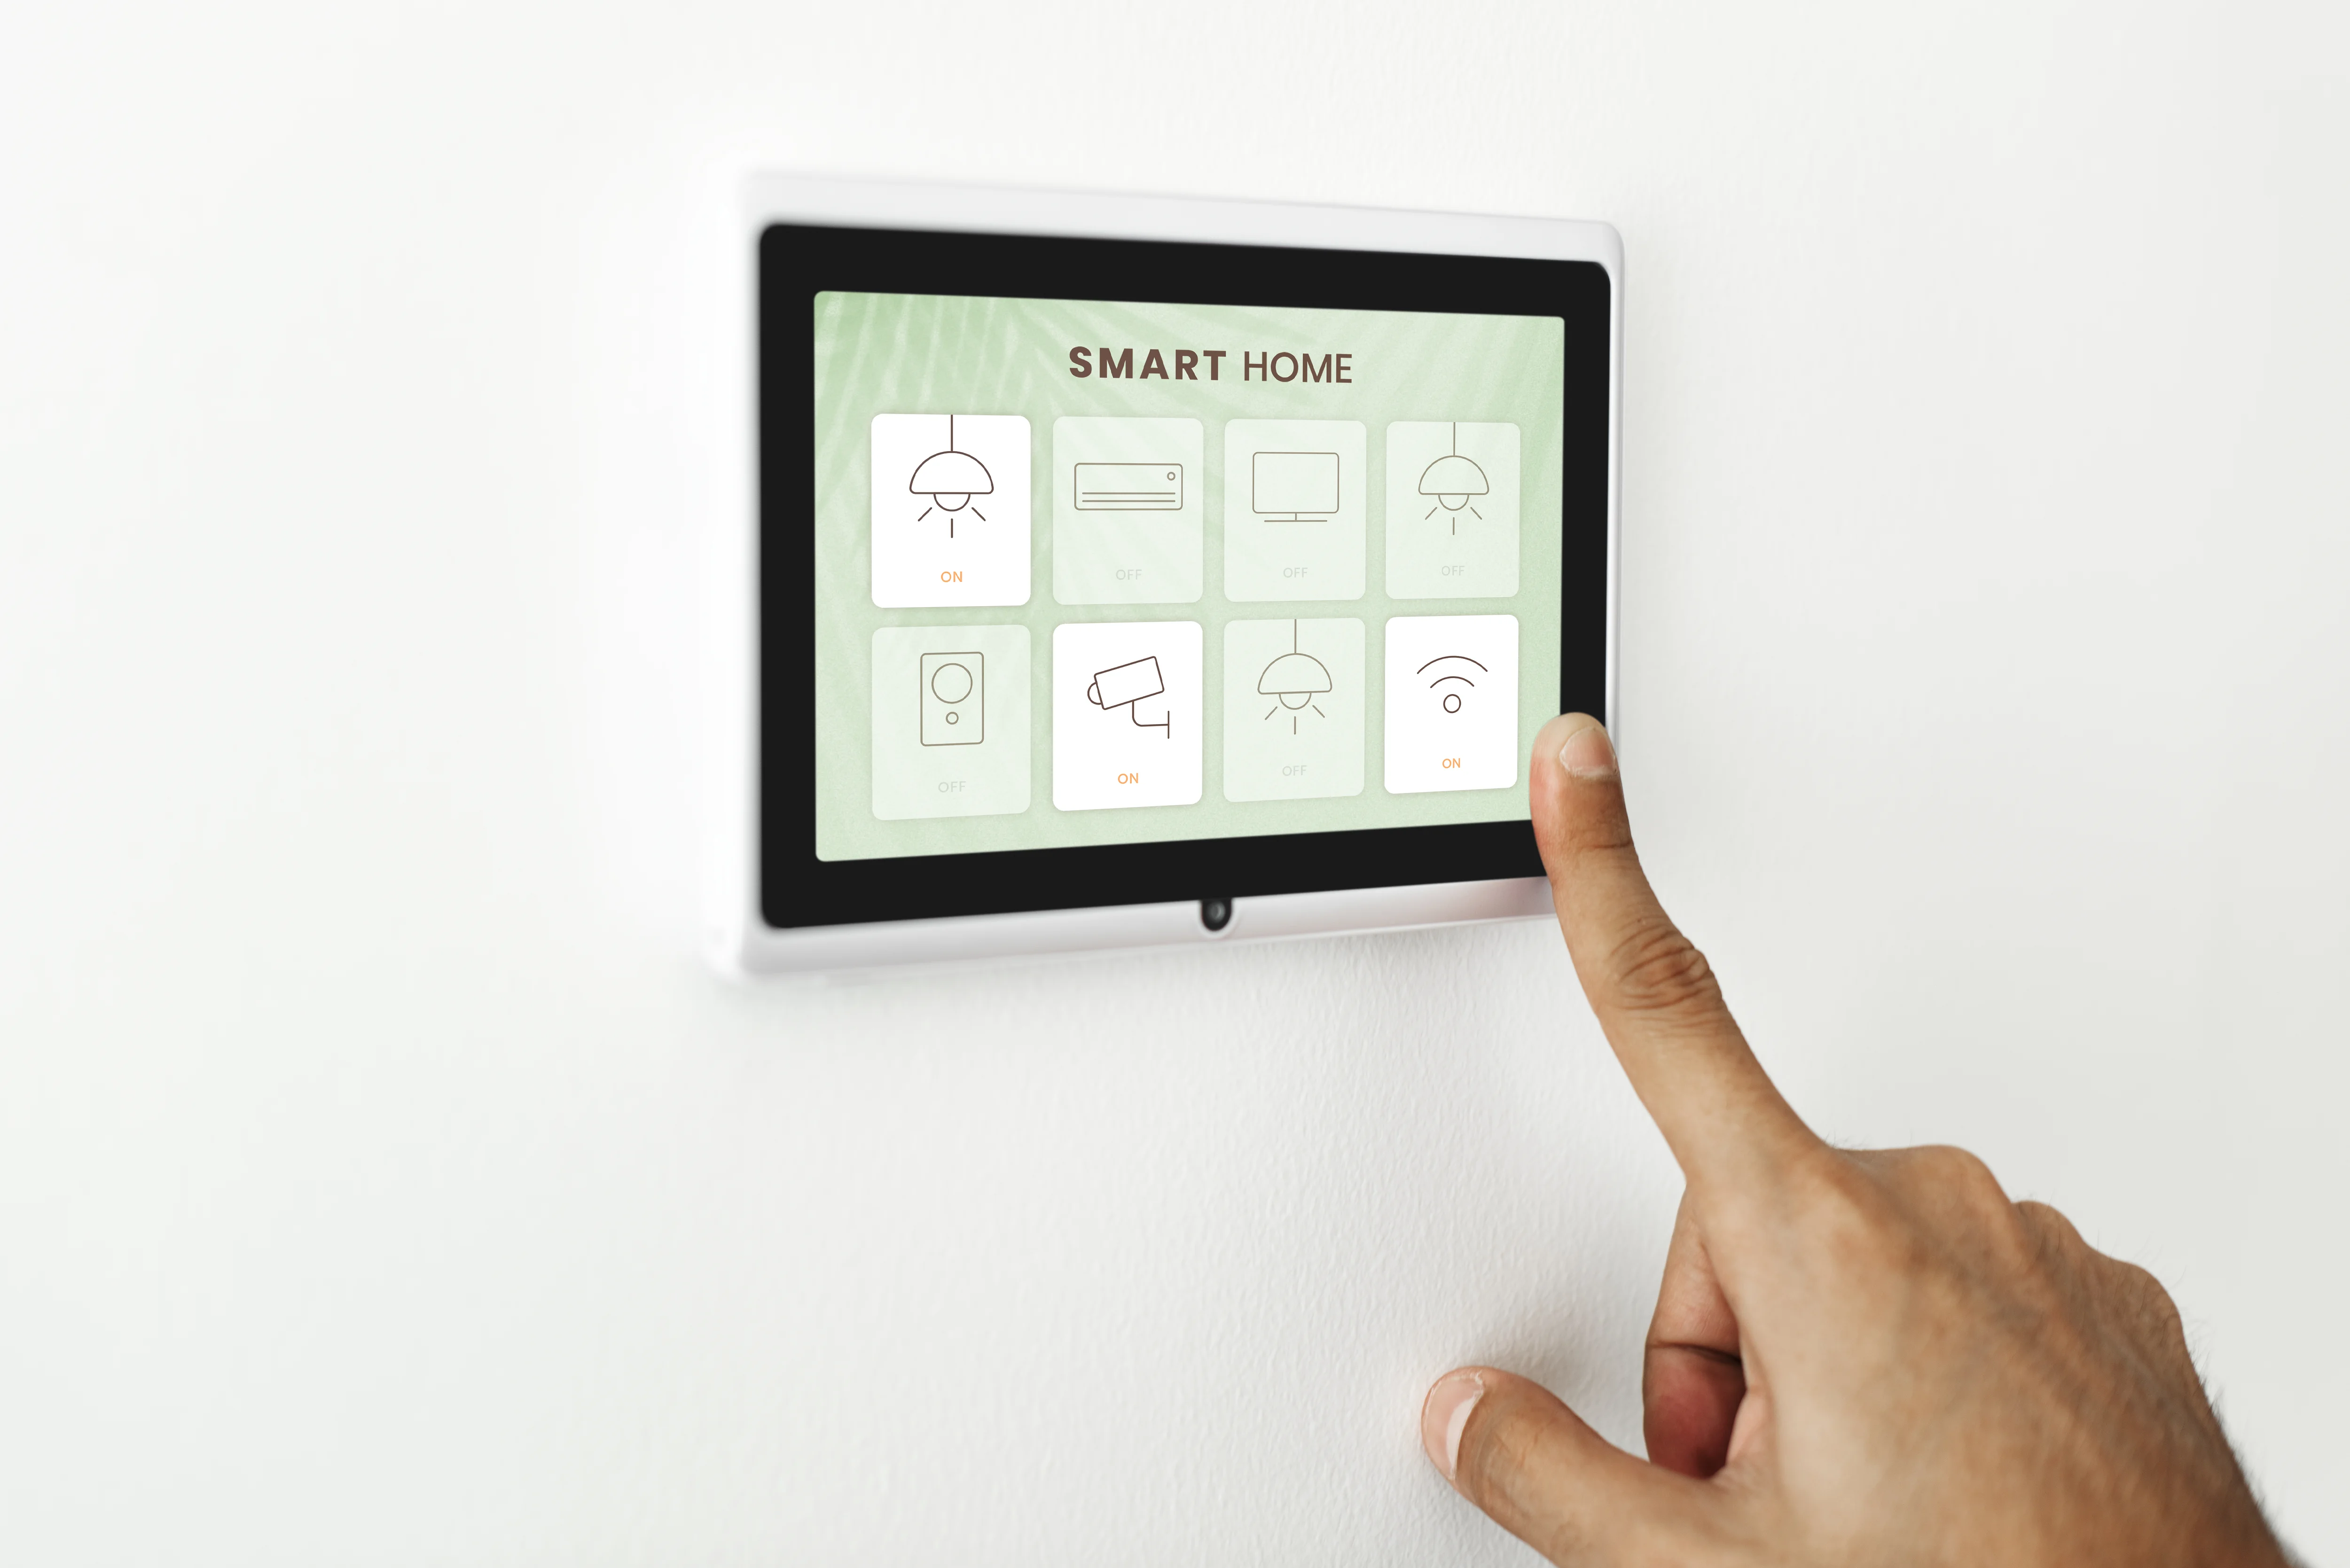 A person using the tablet on the wall, tapping on a screen that displays a “SMART HOME” control panel.